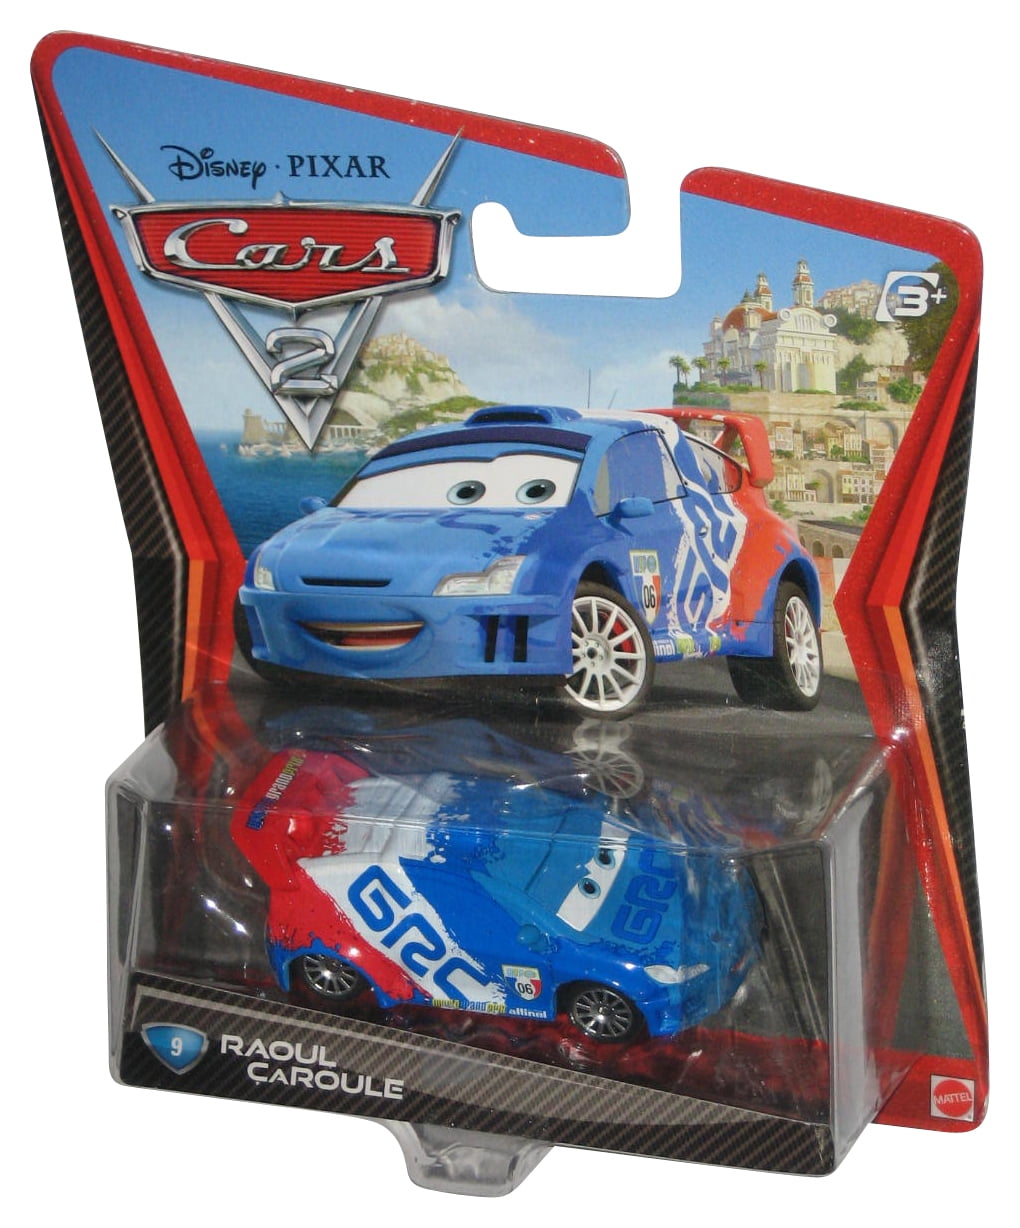 M2809 3+ Disney Cars 2 RAOUL CAROULE Diecast Toy Vehicle 